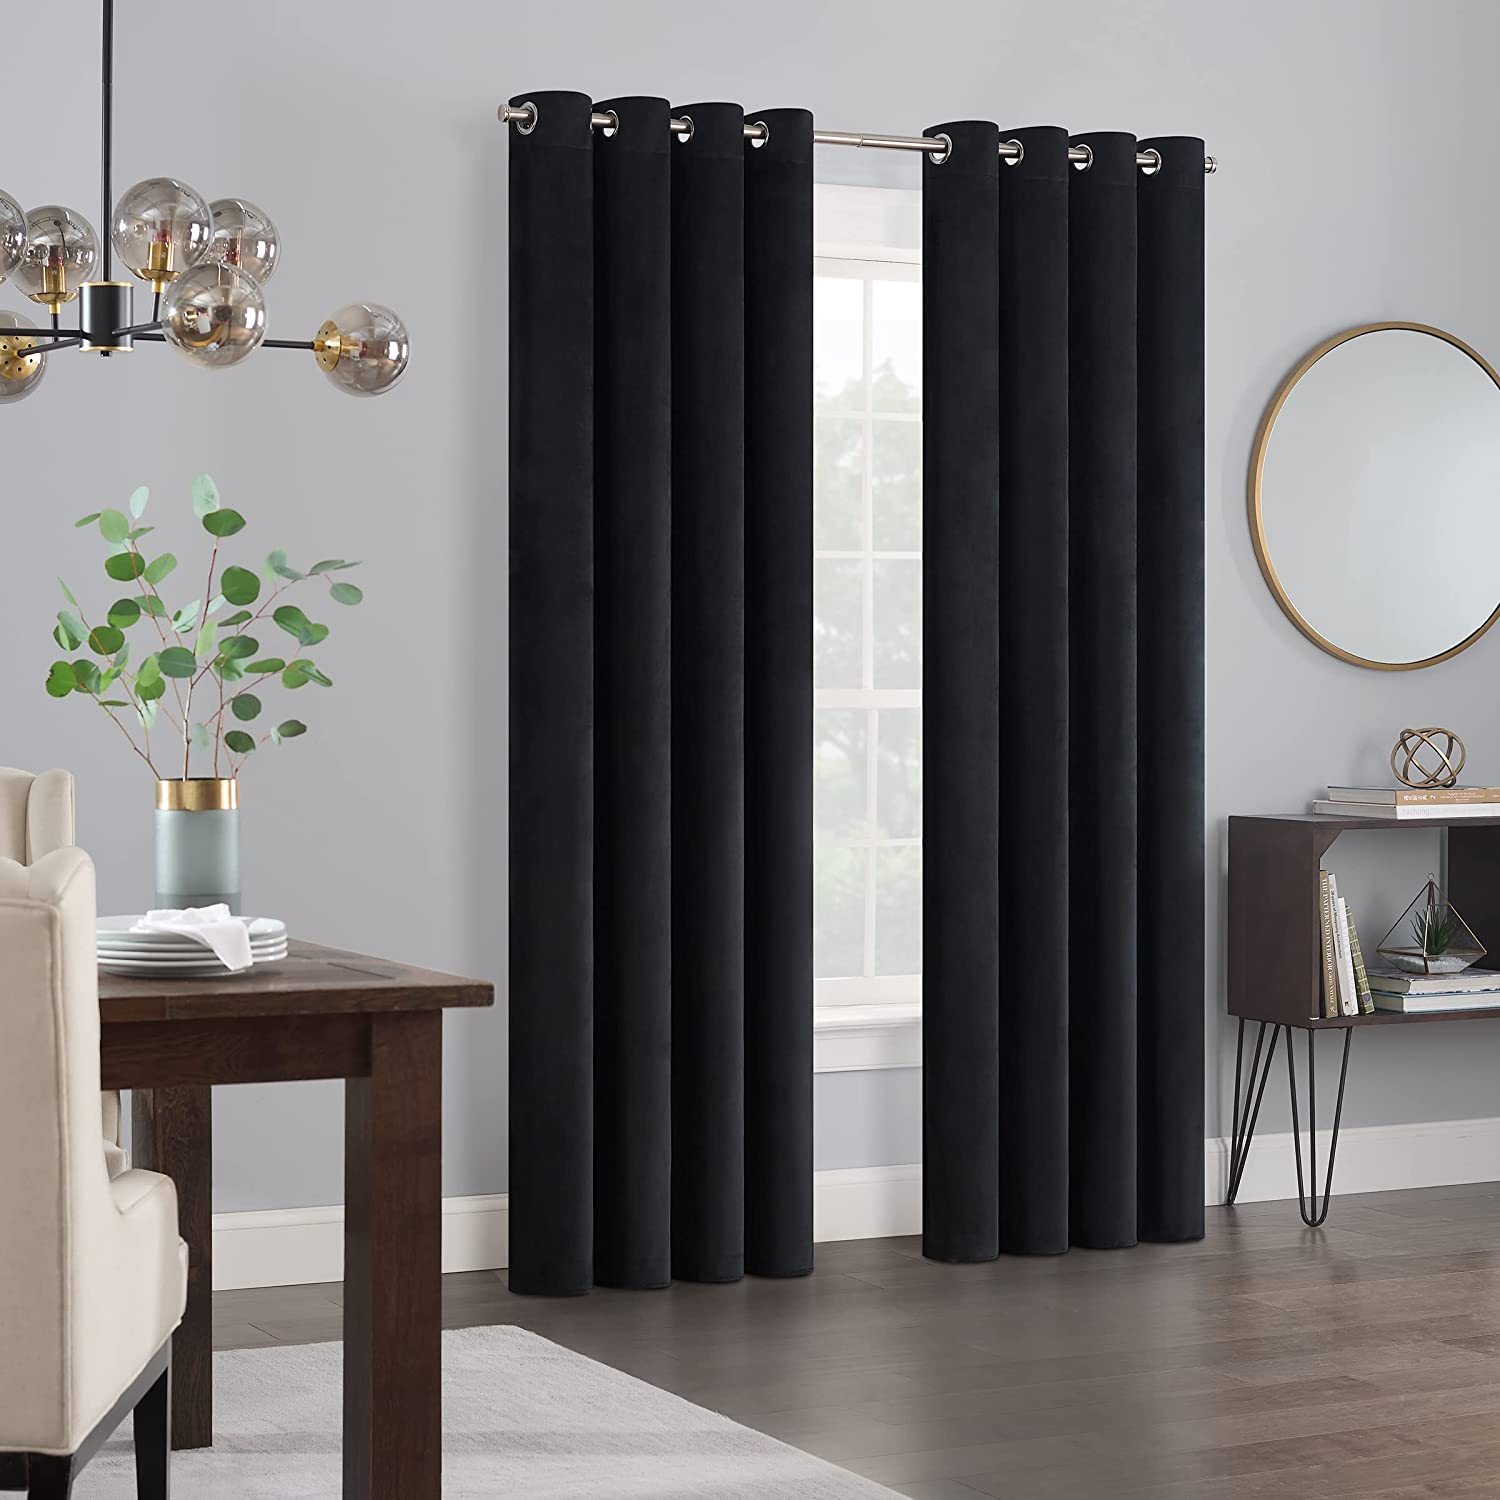 2X BLACK Blockout Curtains Blackout Curtain Window Eyelet Draperies for Bedroom Living Room